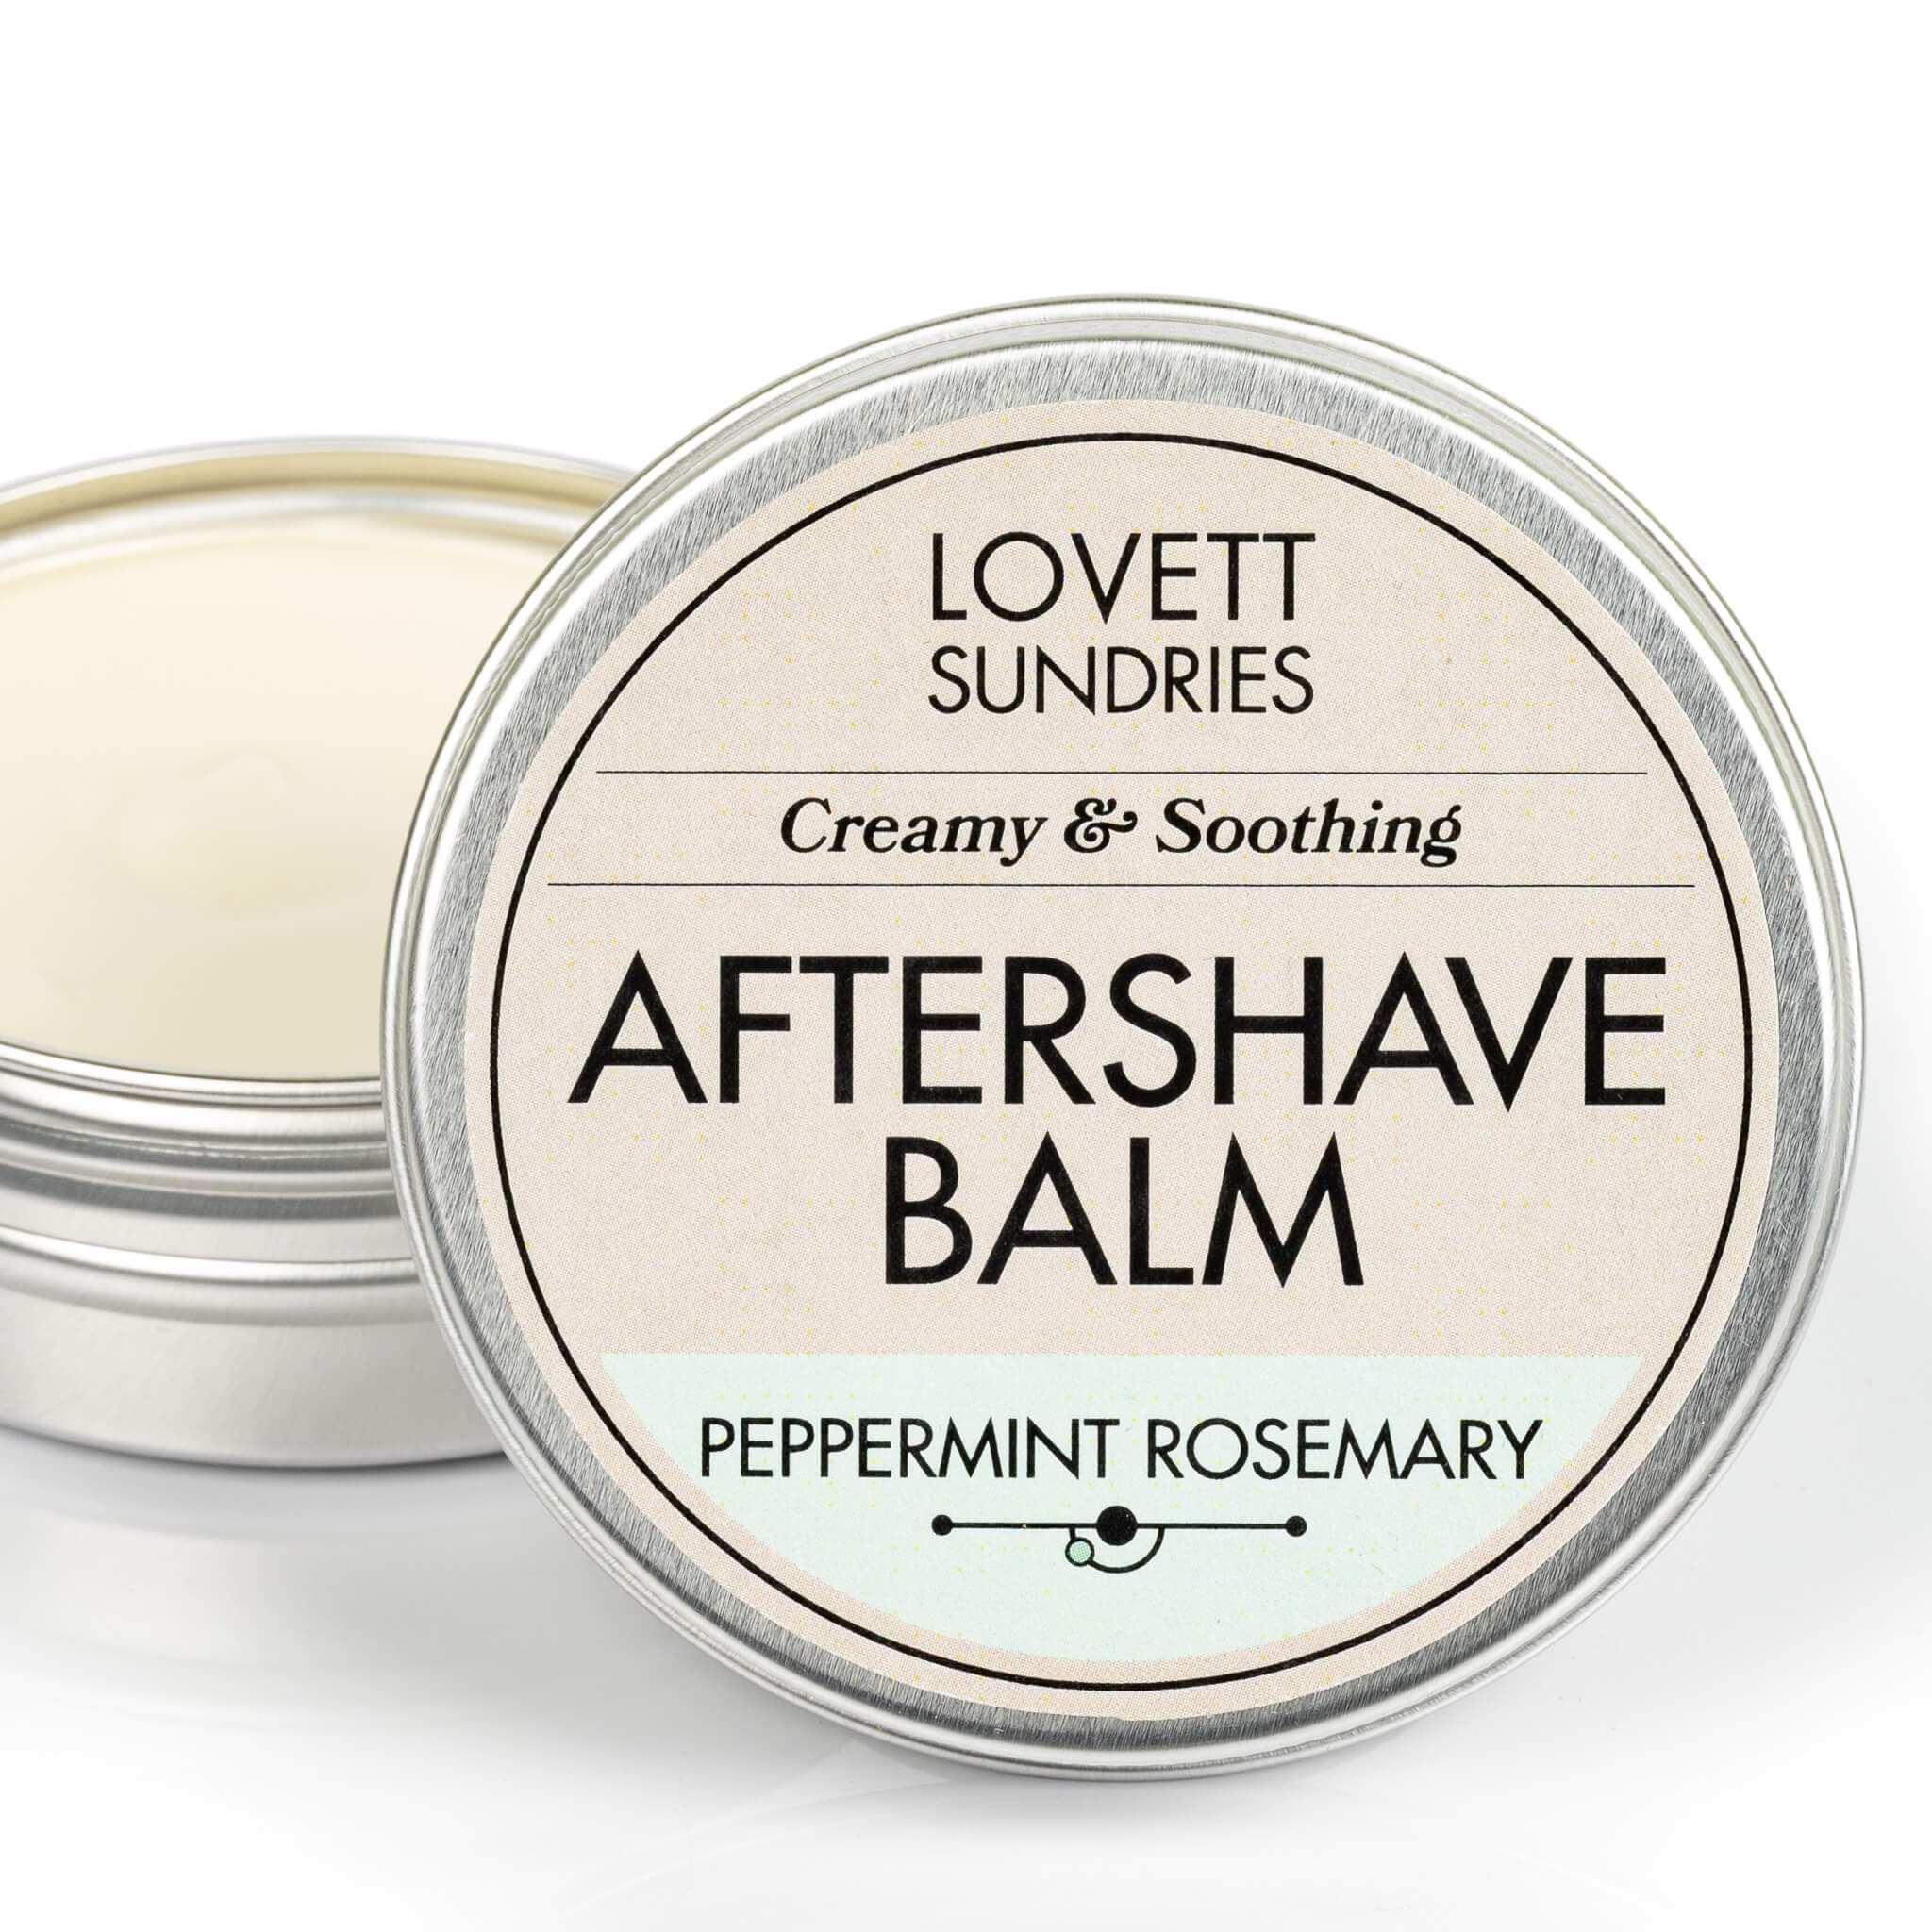 All natural peppermint rosemary scented aftershave balm